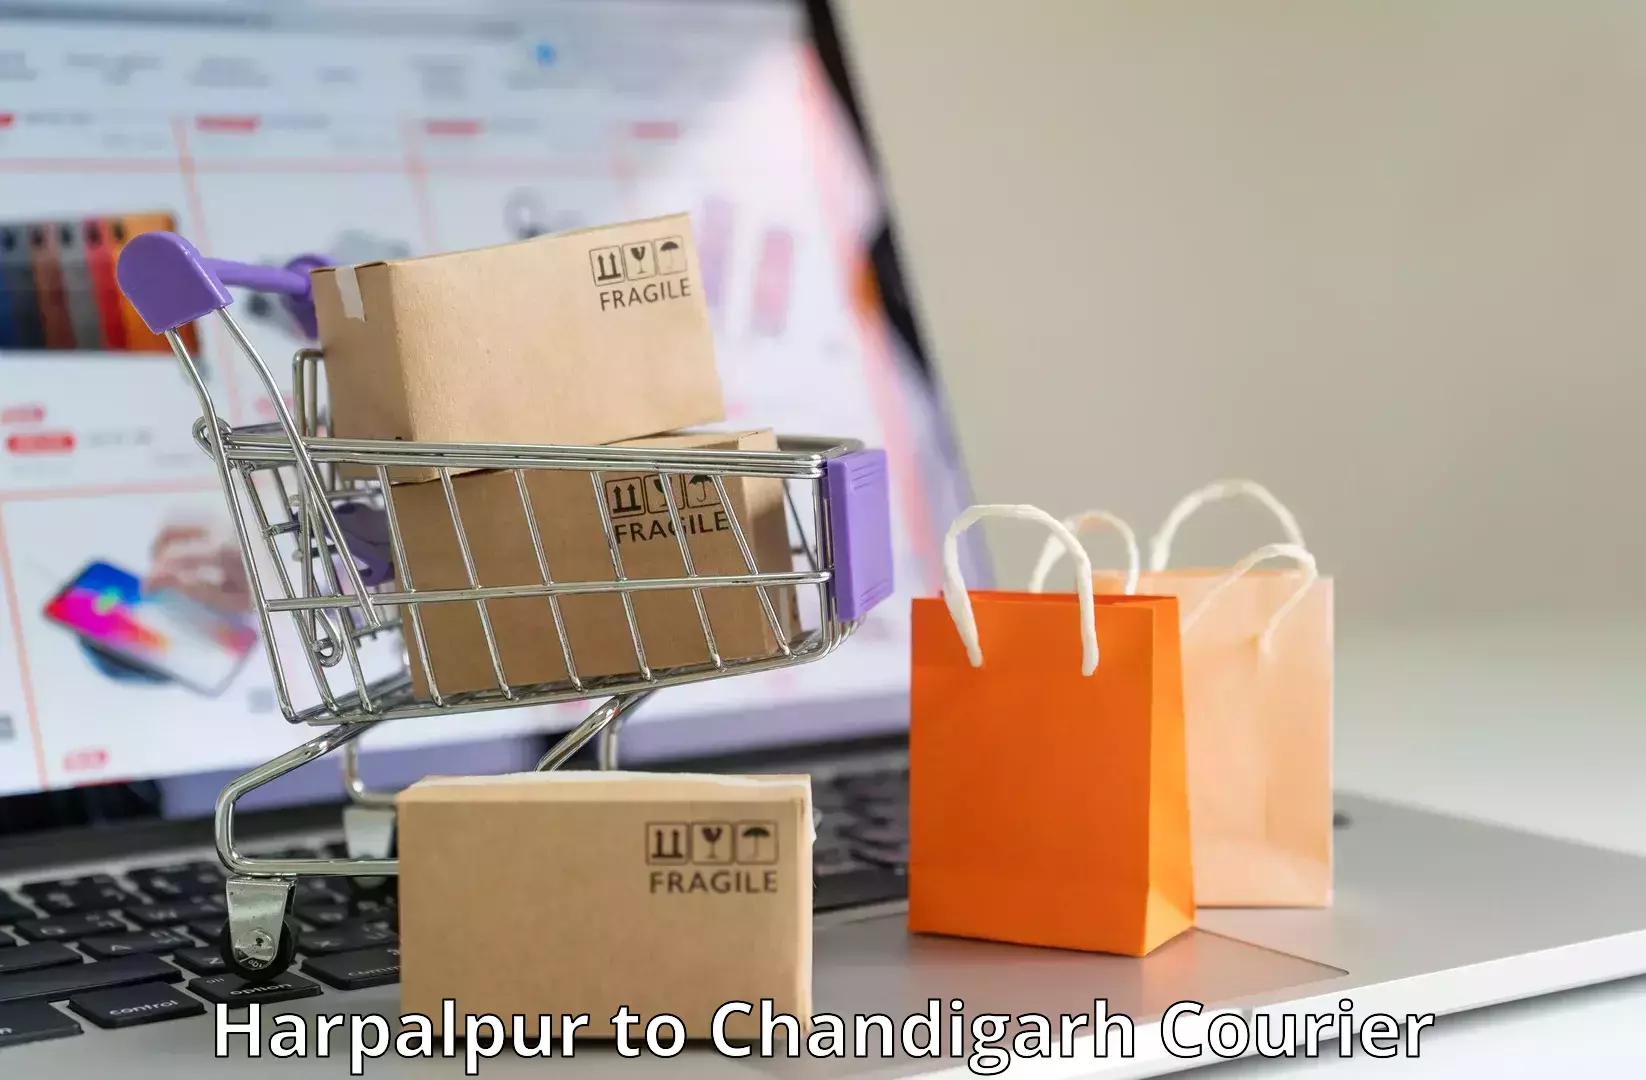 Comprehensive parcel tracking in Harpalpur to Chandigarh